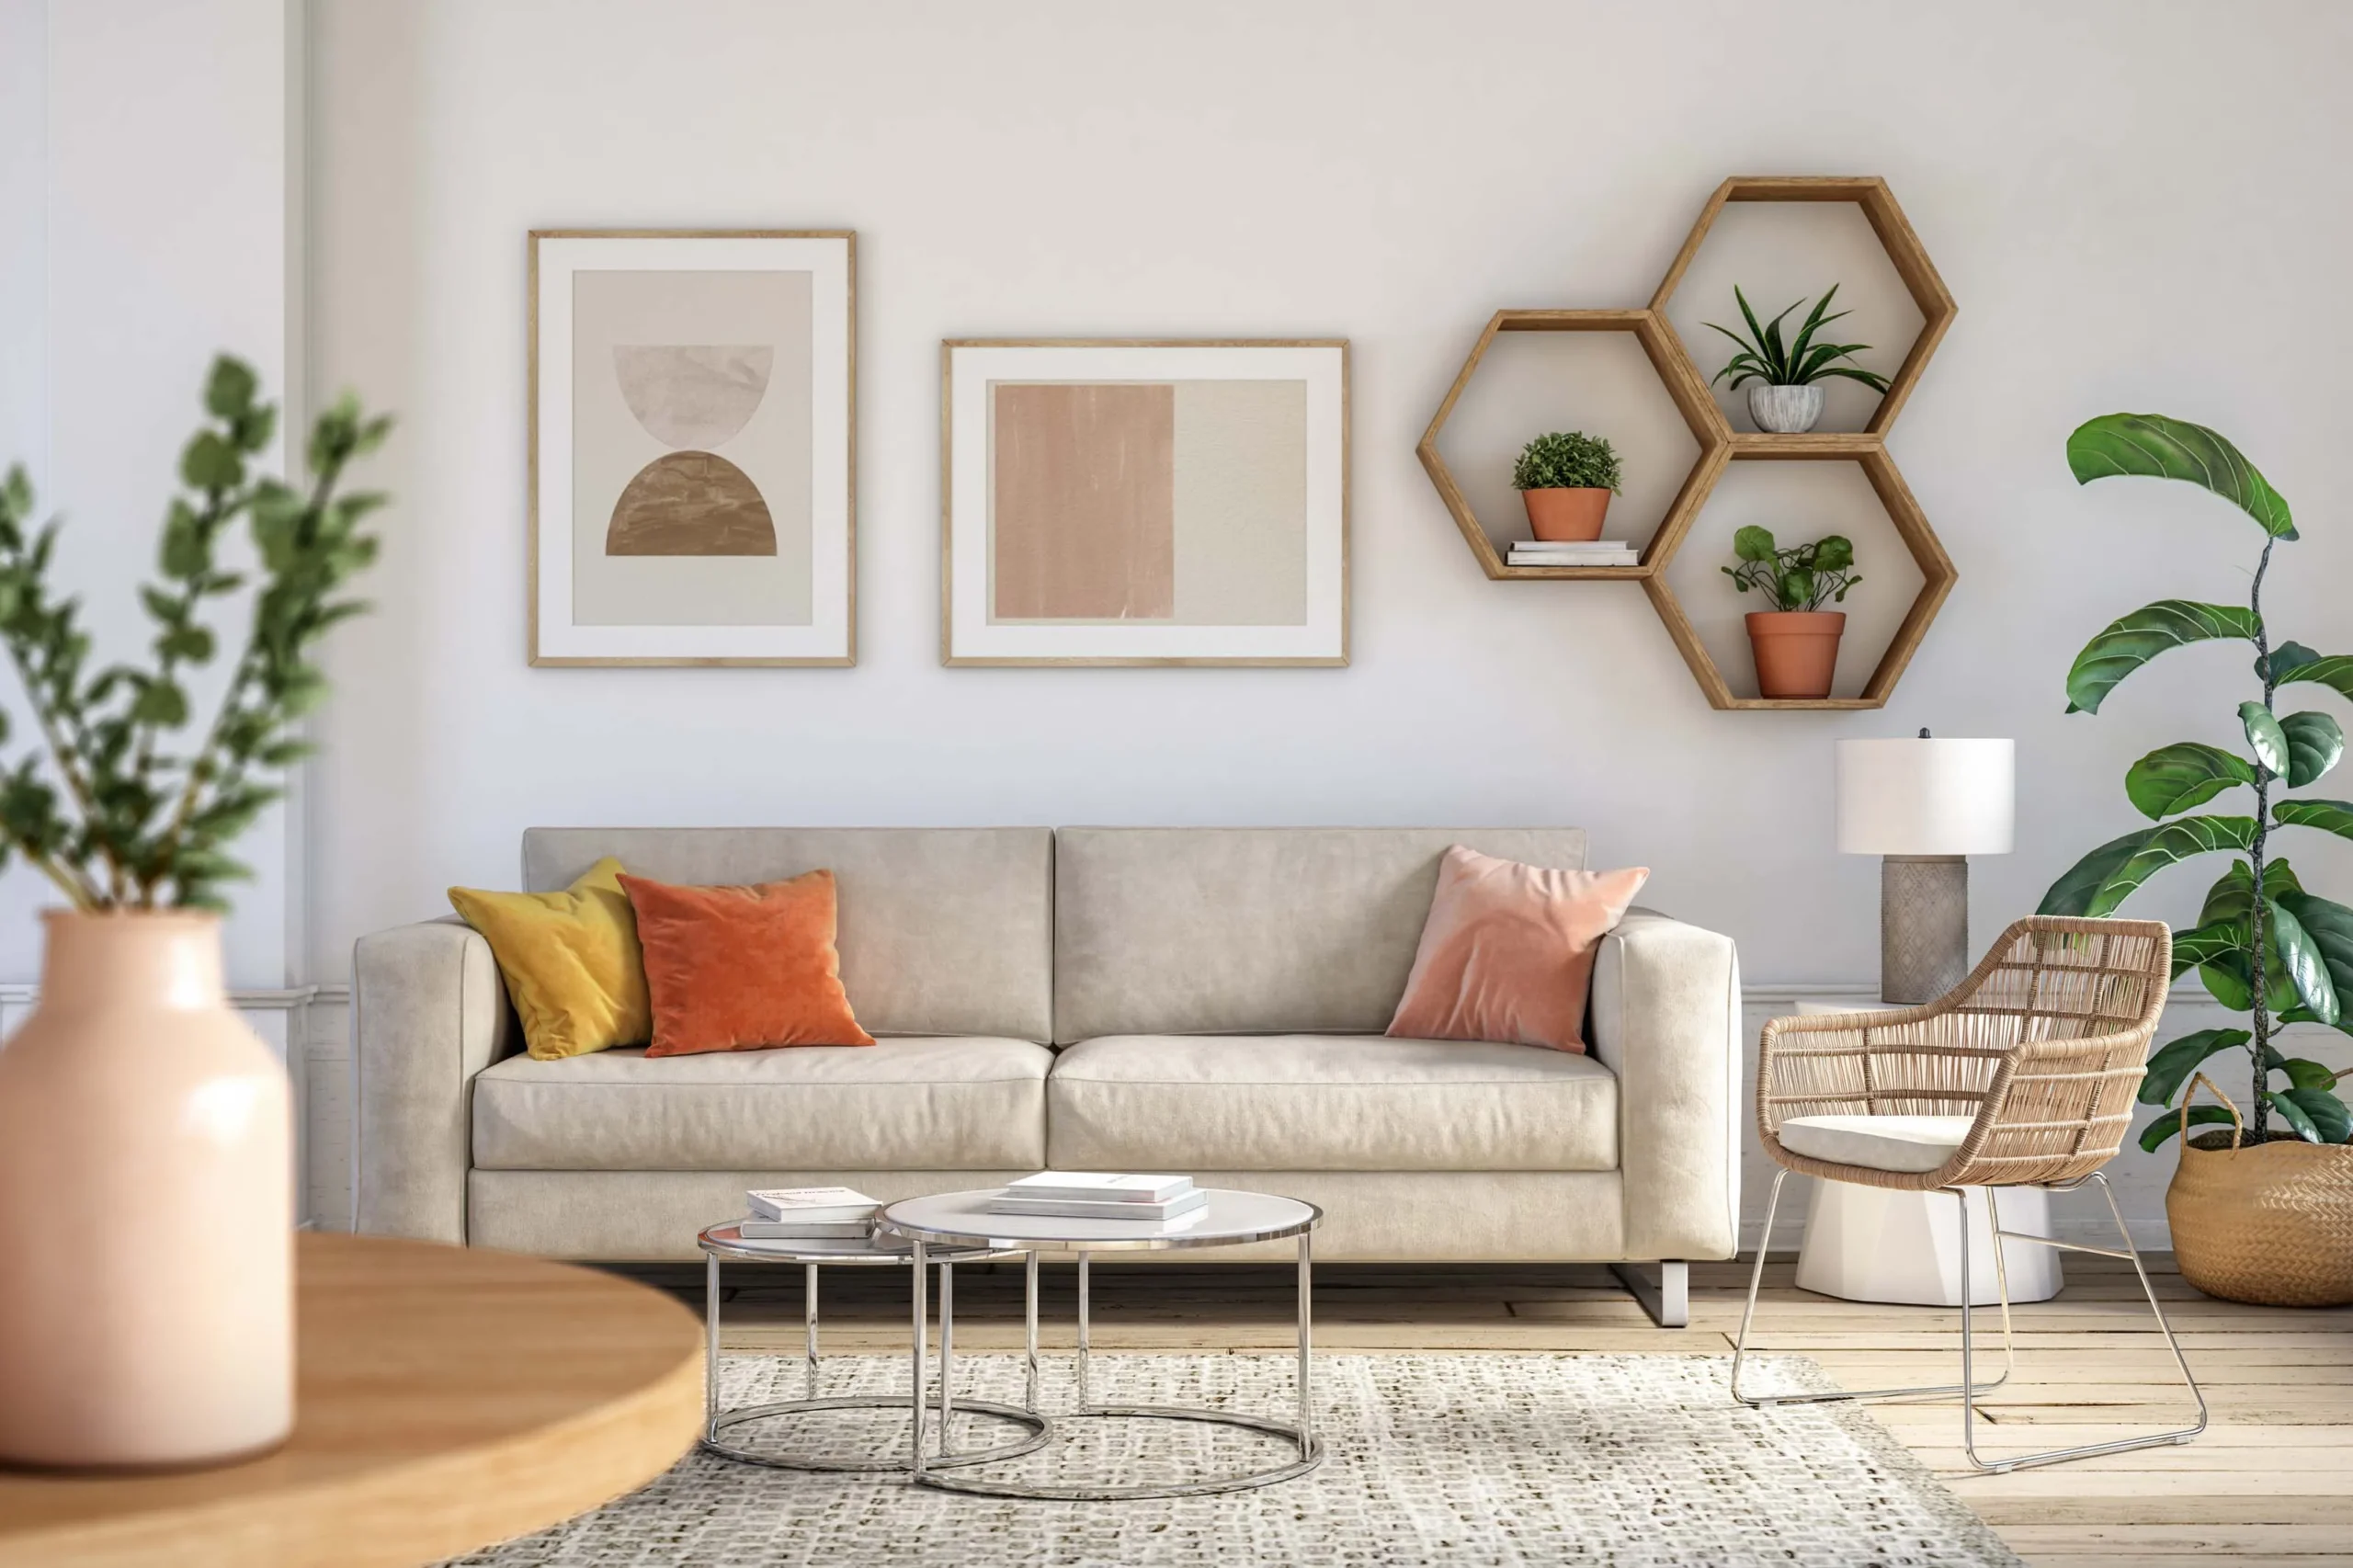 Staging to Sell: The Impact of Home Staging on Sale Price and Time on Market